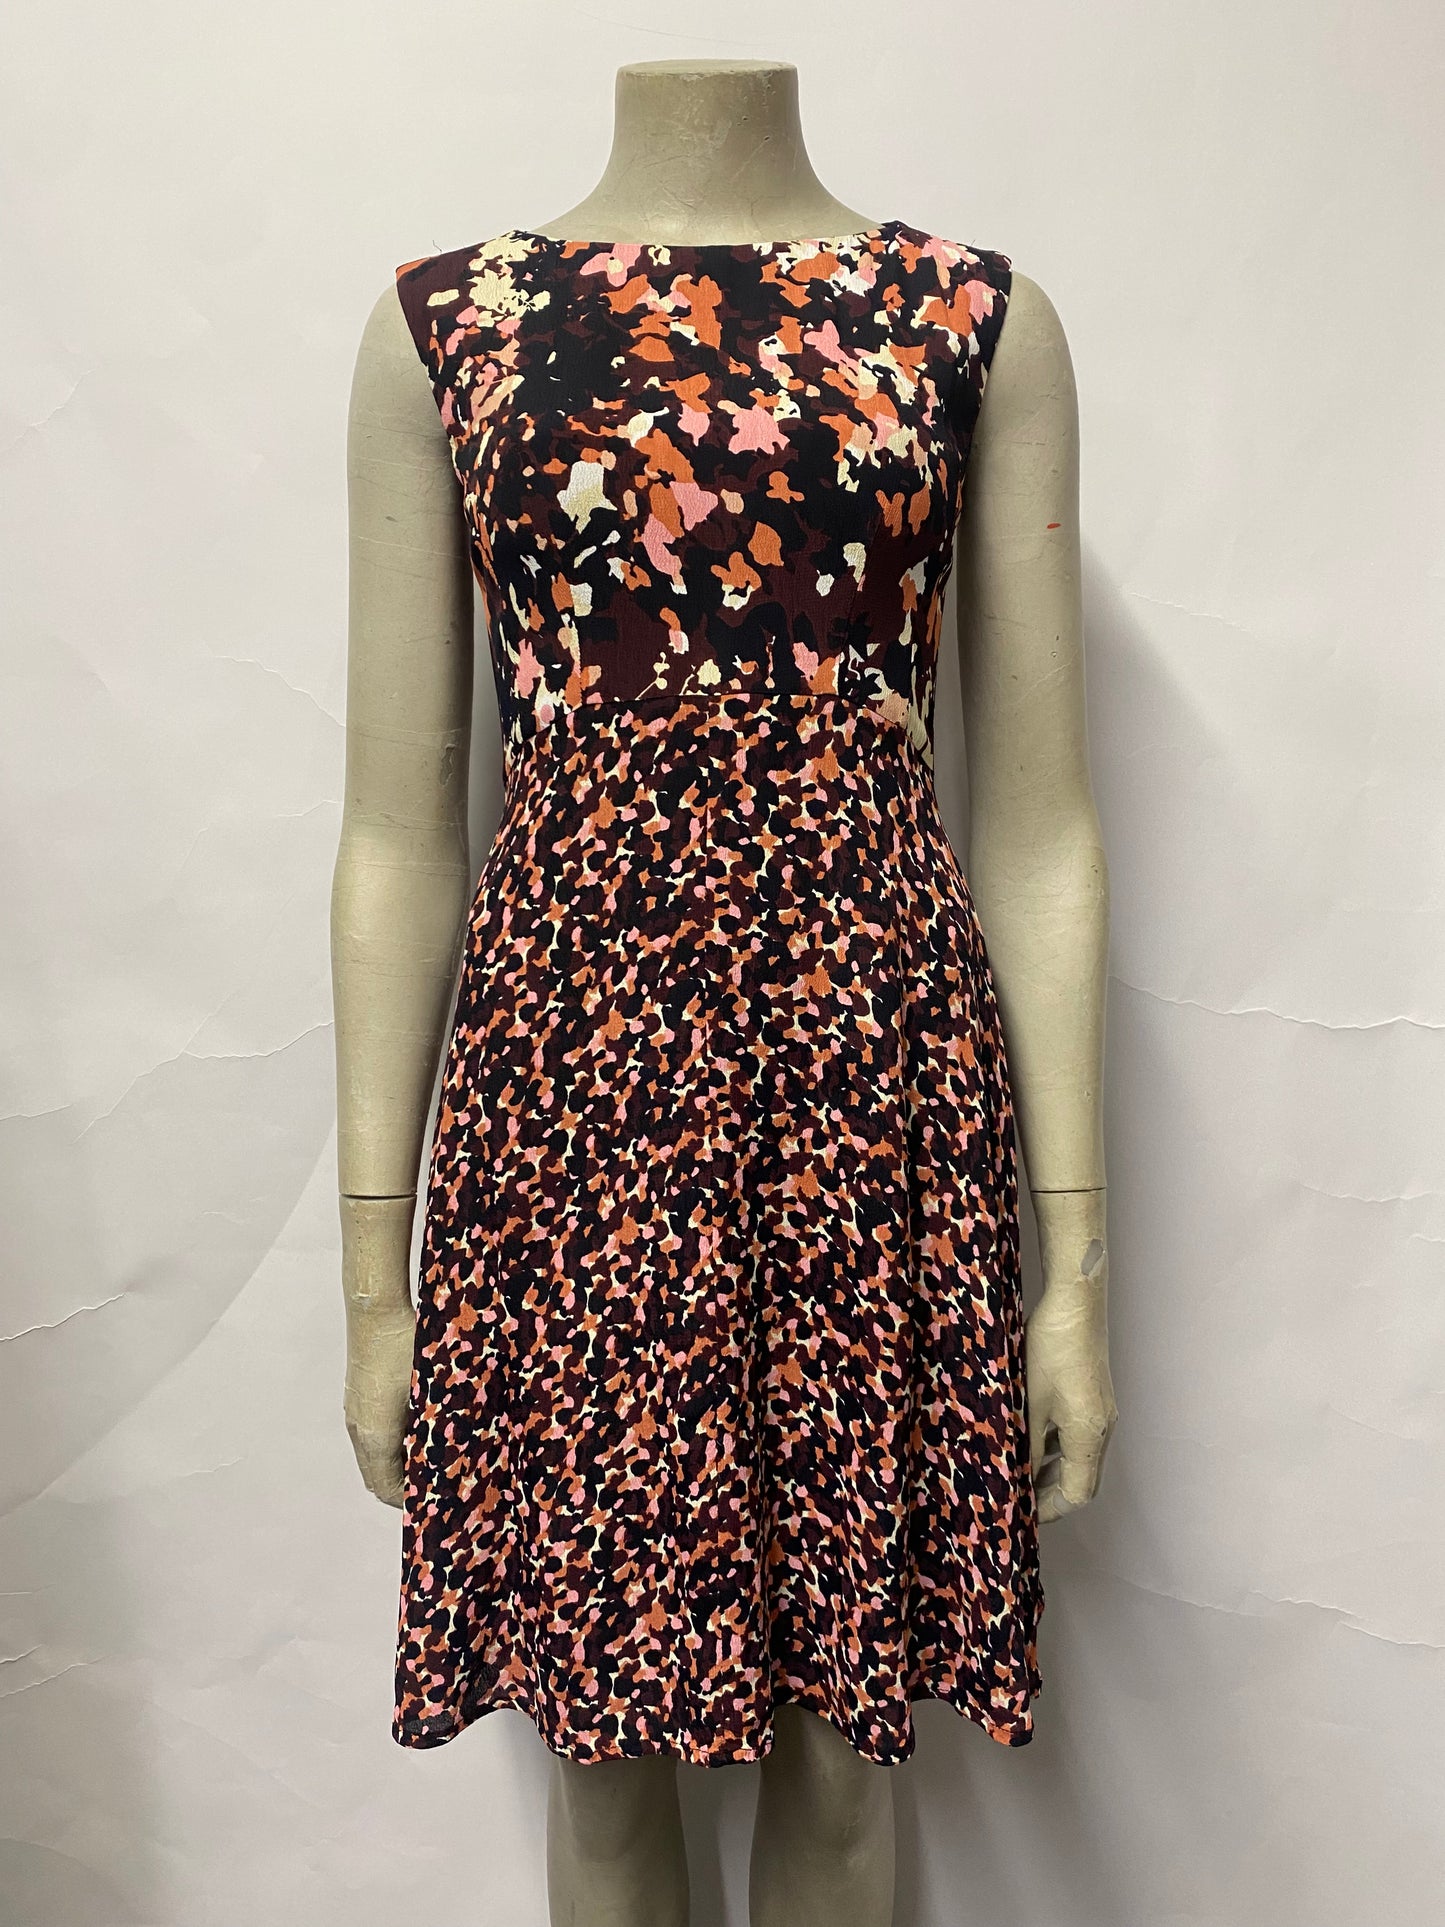 French Connection Black and Pink Floral Summer Dress 6